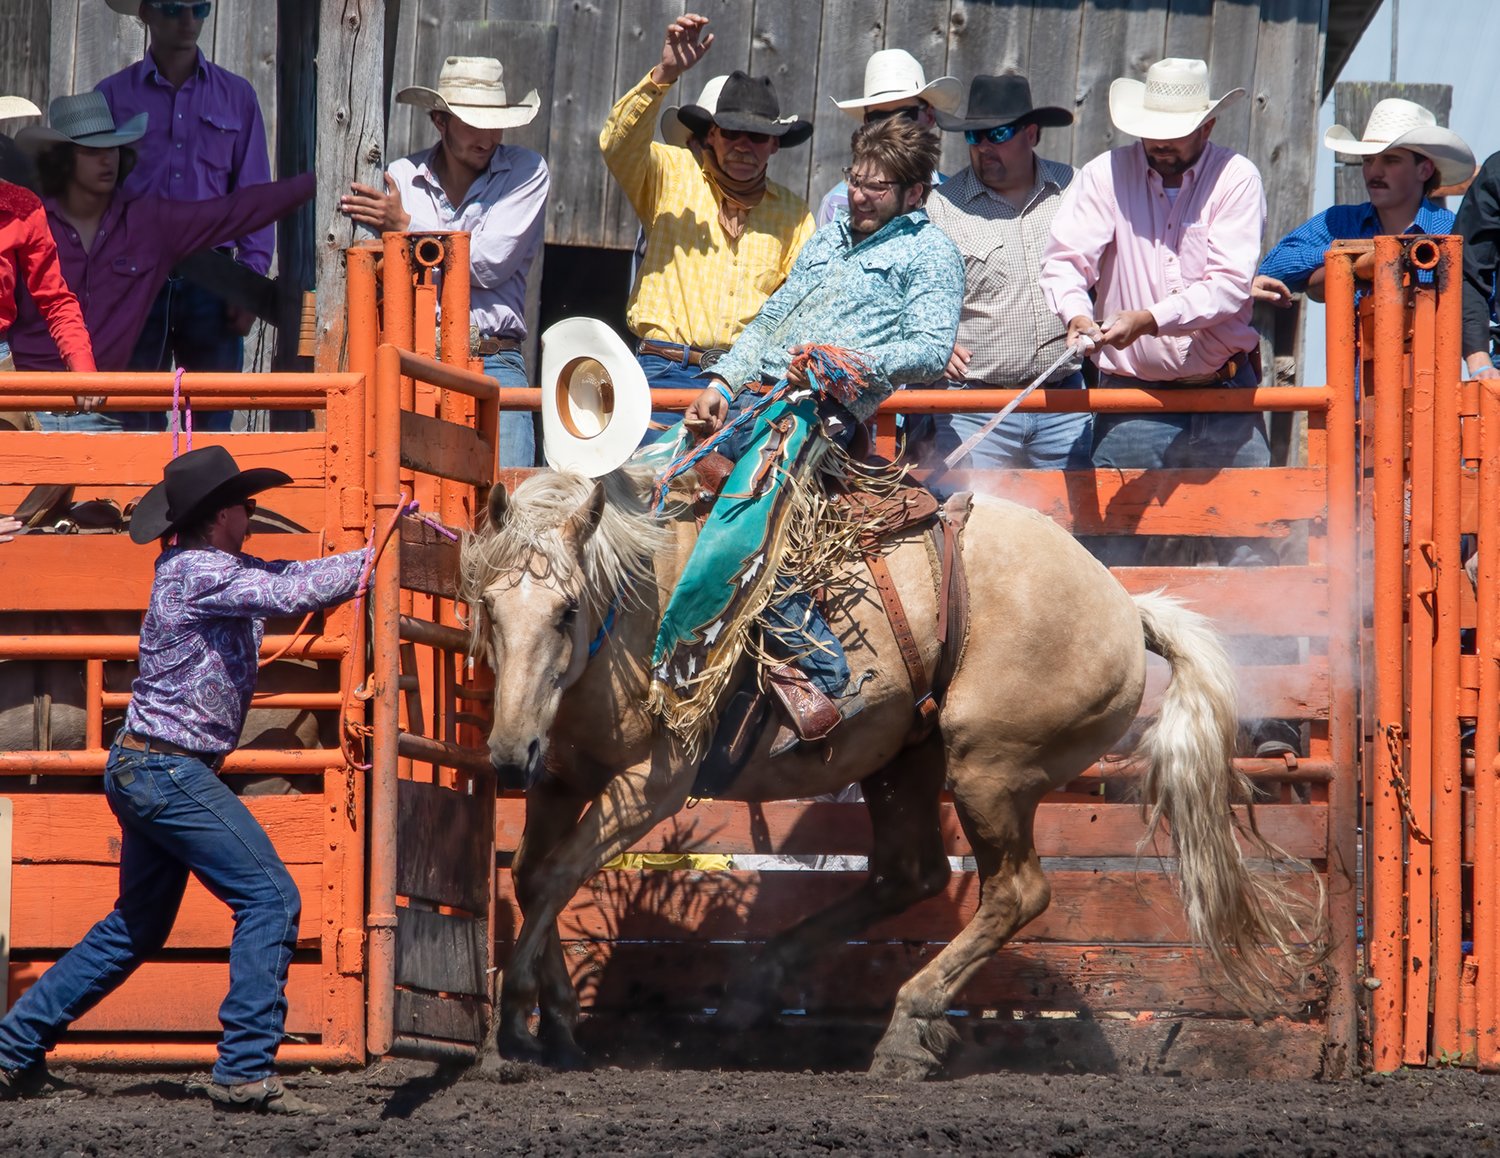 As the gate opens, this cowboy braces for a rough and tumble ride.